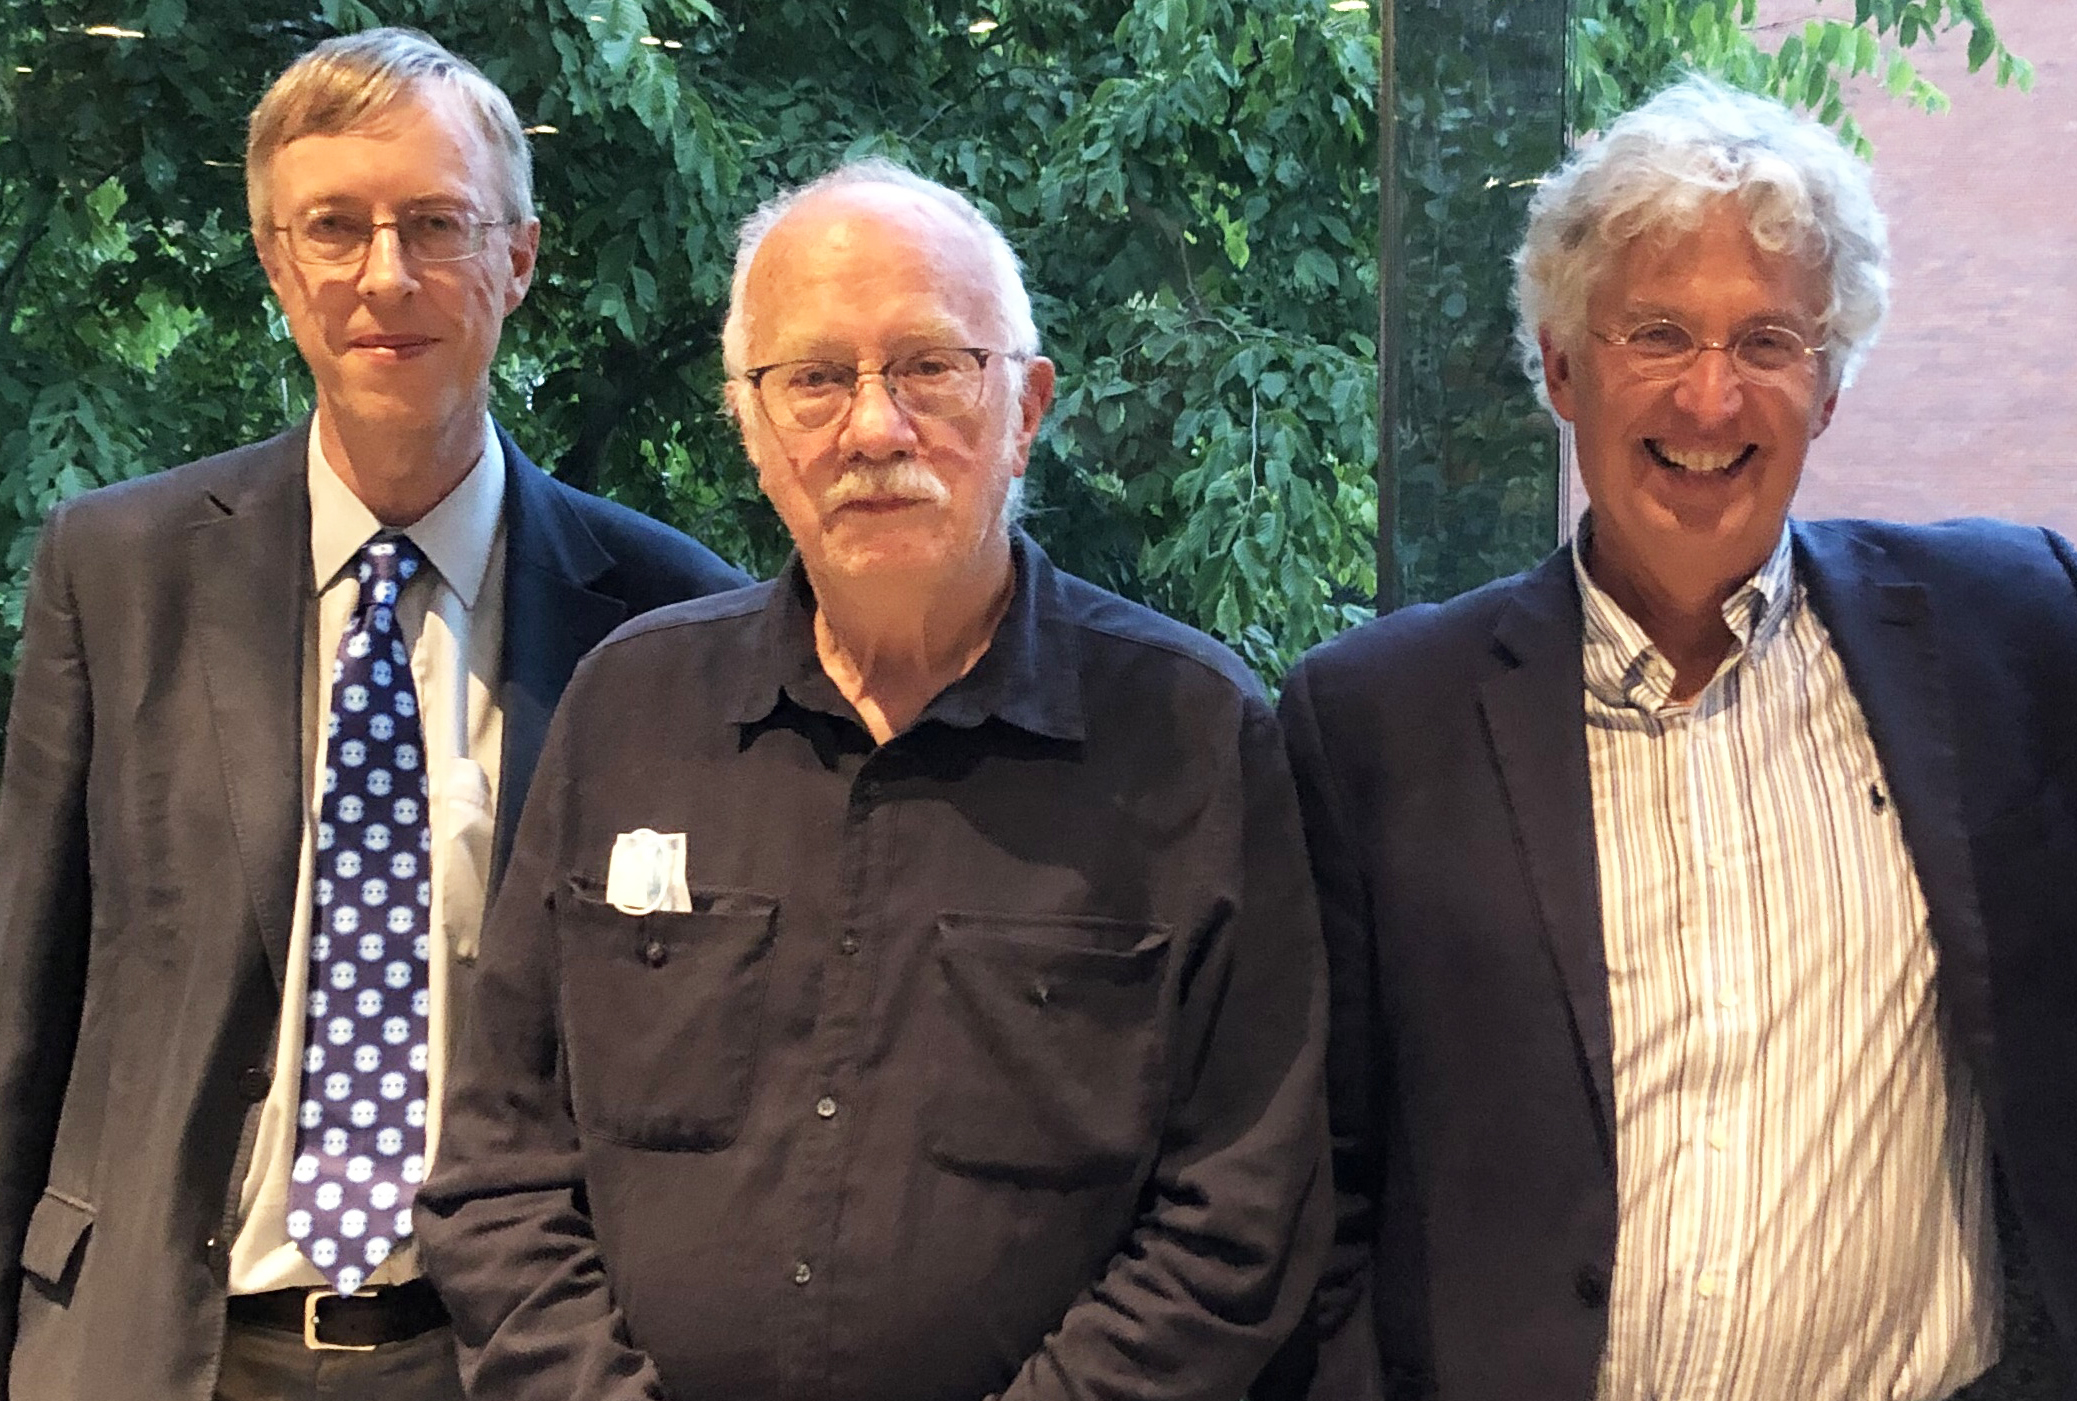 From left to right: Nick Higham, George Hall of the University of Manchester (Nick’s Ph.D. supervisor), and Charlie Van Loan of Cornell University gather for a photo at the conference on “Advances in Numerical Linear Algebra: Celebrating the 60th Birthday of Nick Higham,” which was held in July 2022 at the University of Manchester. Nick is wearing a Bohemian matrix eigenvalue tie, which was a gift from Rob Corless of the University of Western Ontario. Photo courtesy of Desmond Higham.